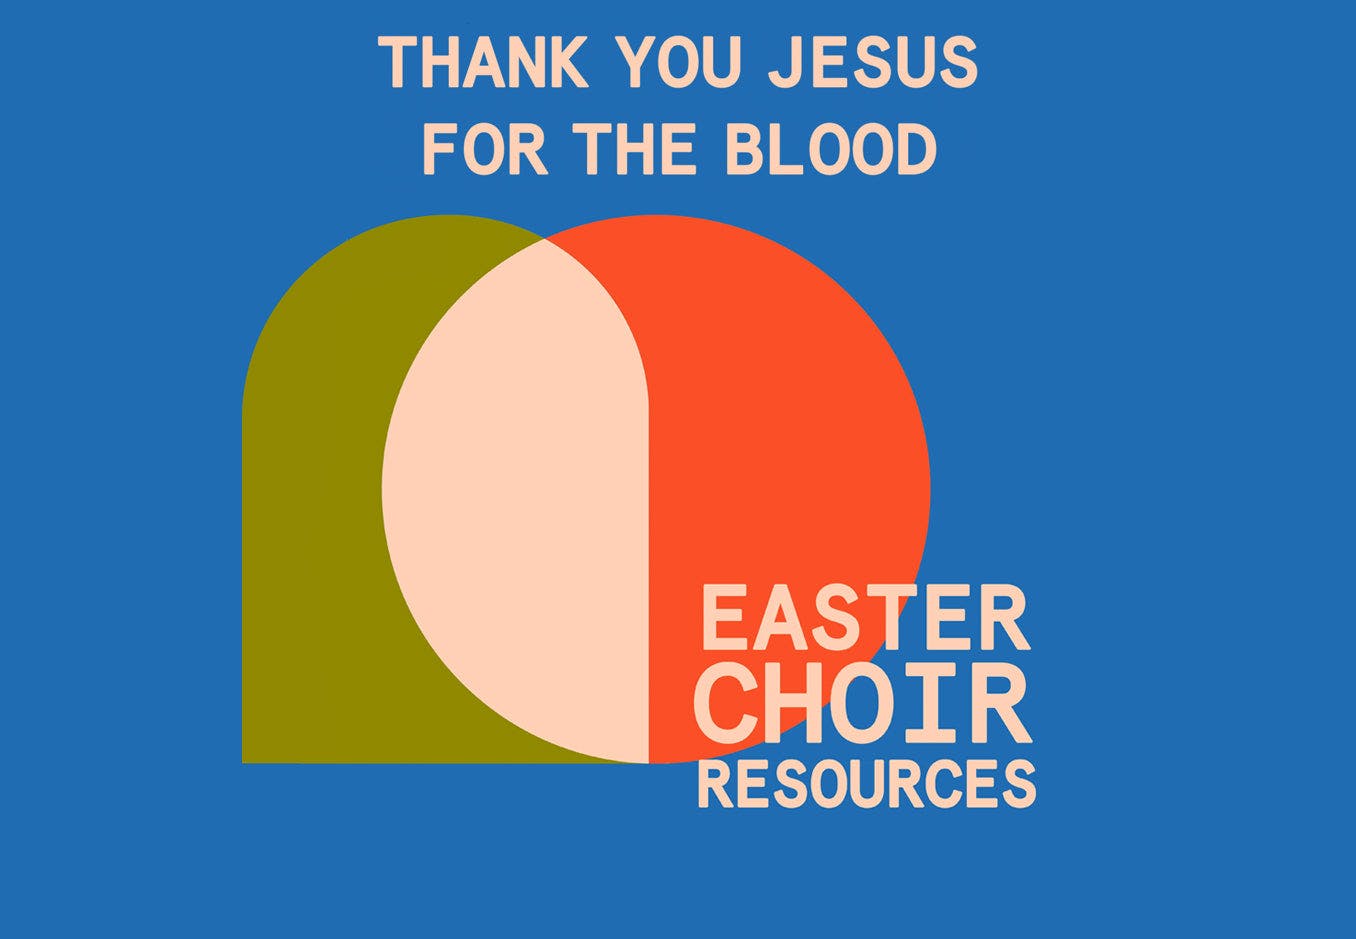 EASTER CHOIR RESOURCES - Thank you Jesus for the Blood